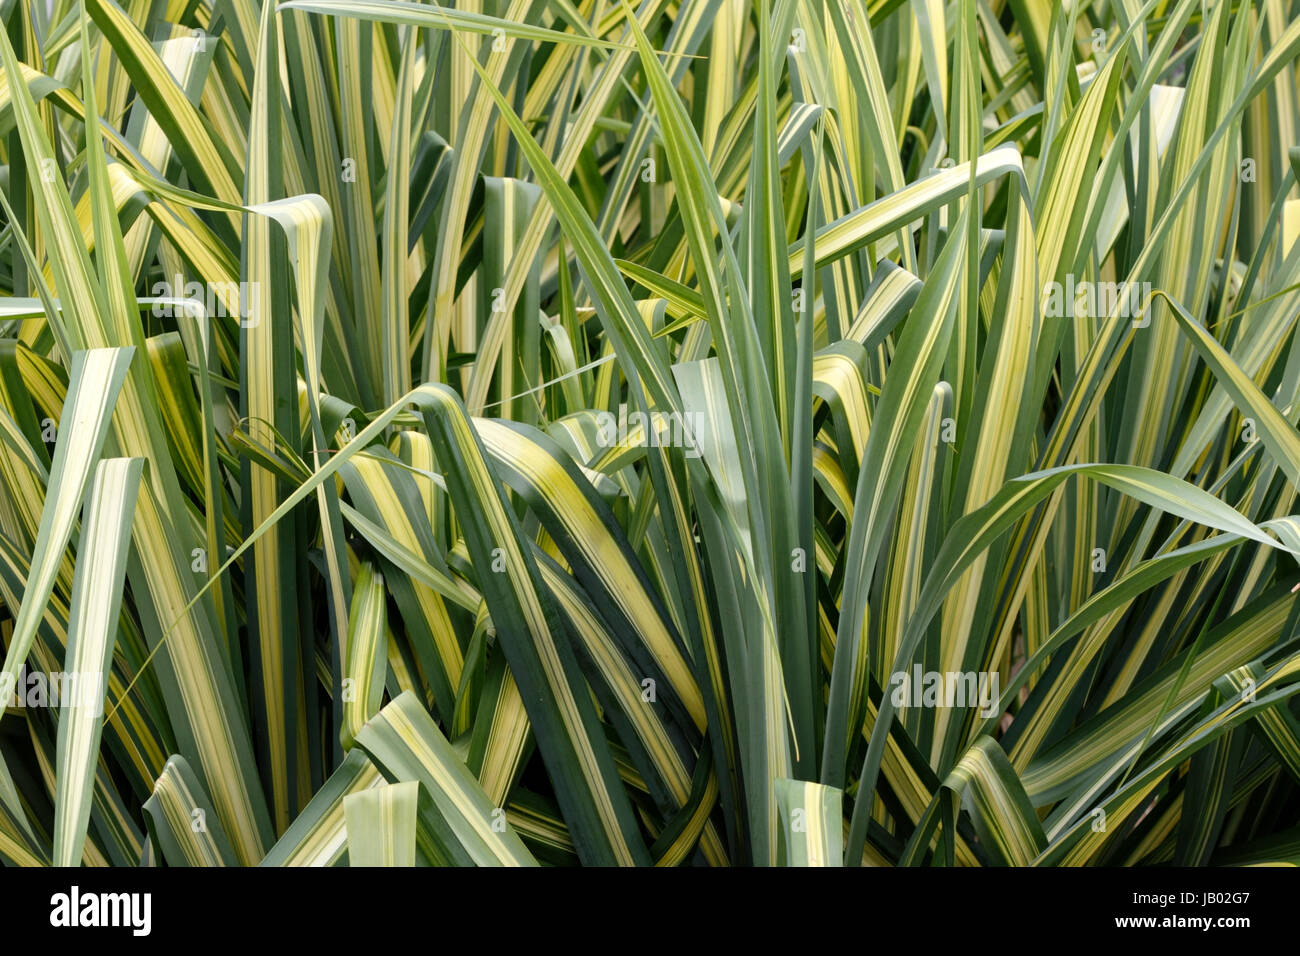 Closeup background of tall, evergreen ornamental sedge grass showing long leaves with green on the borders and a yellow gold stripe running down the center of each leaf growing in south Florida. Stock Photo